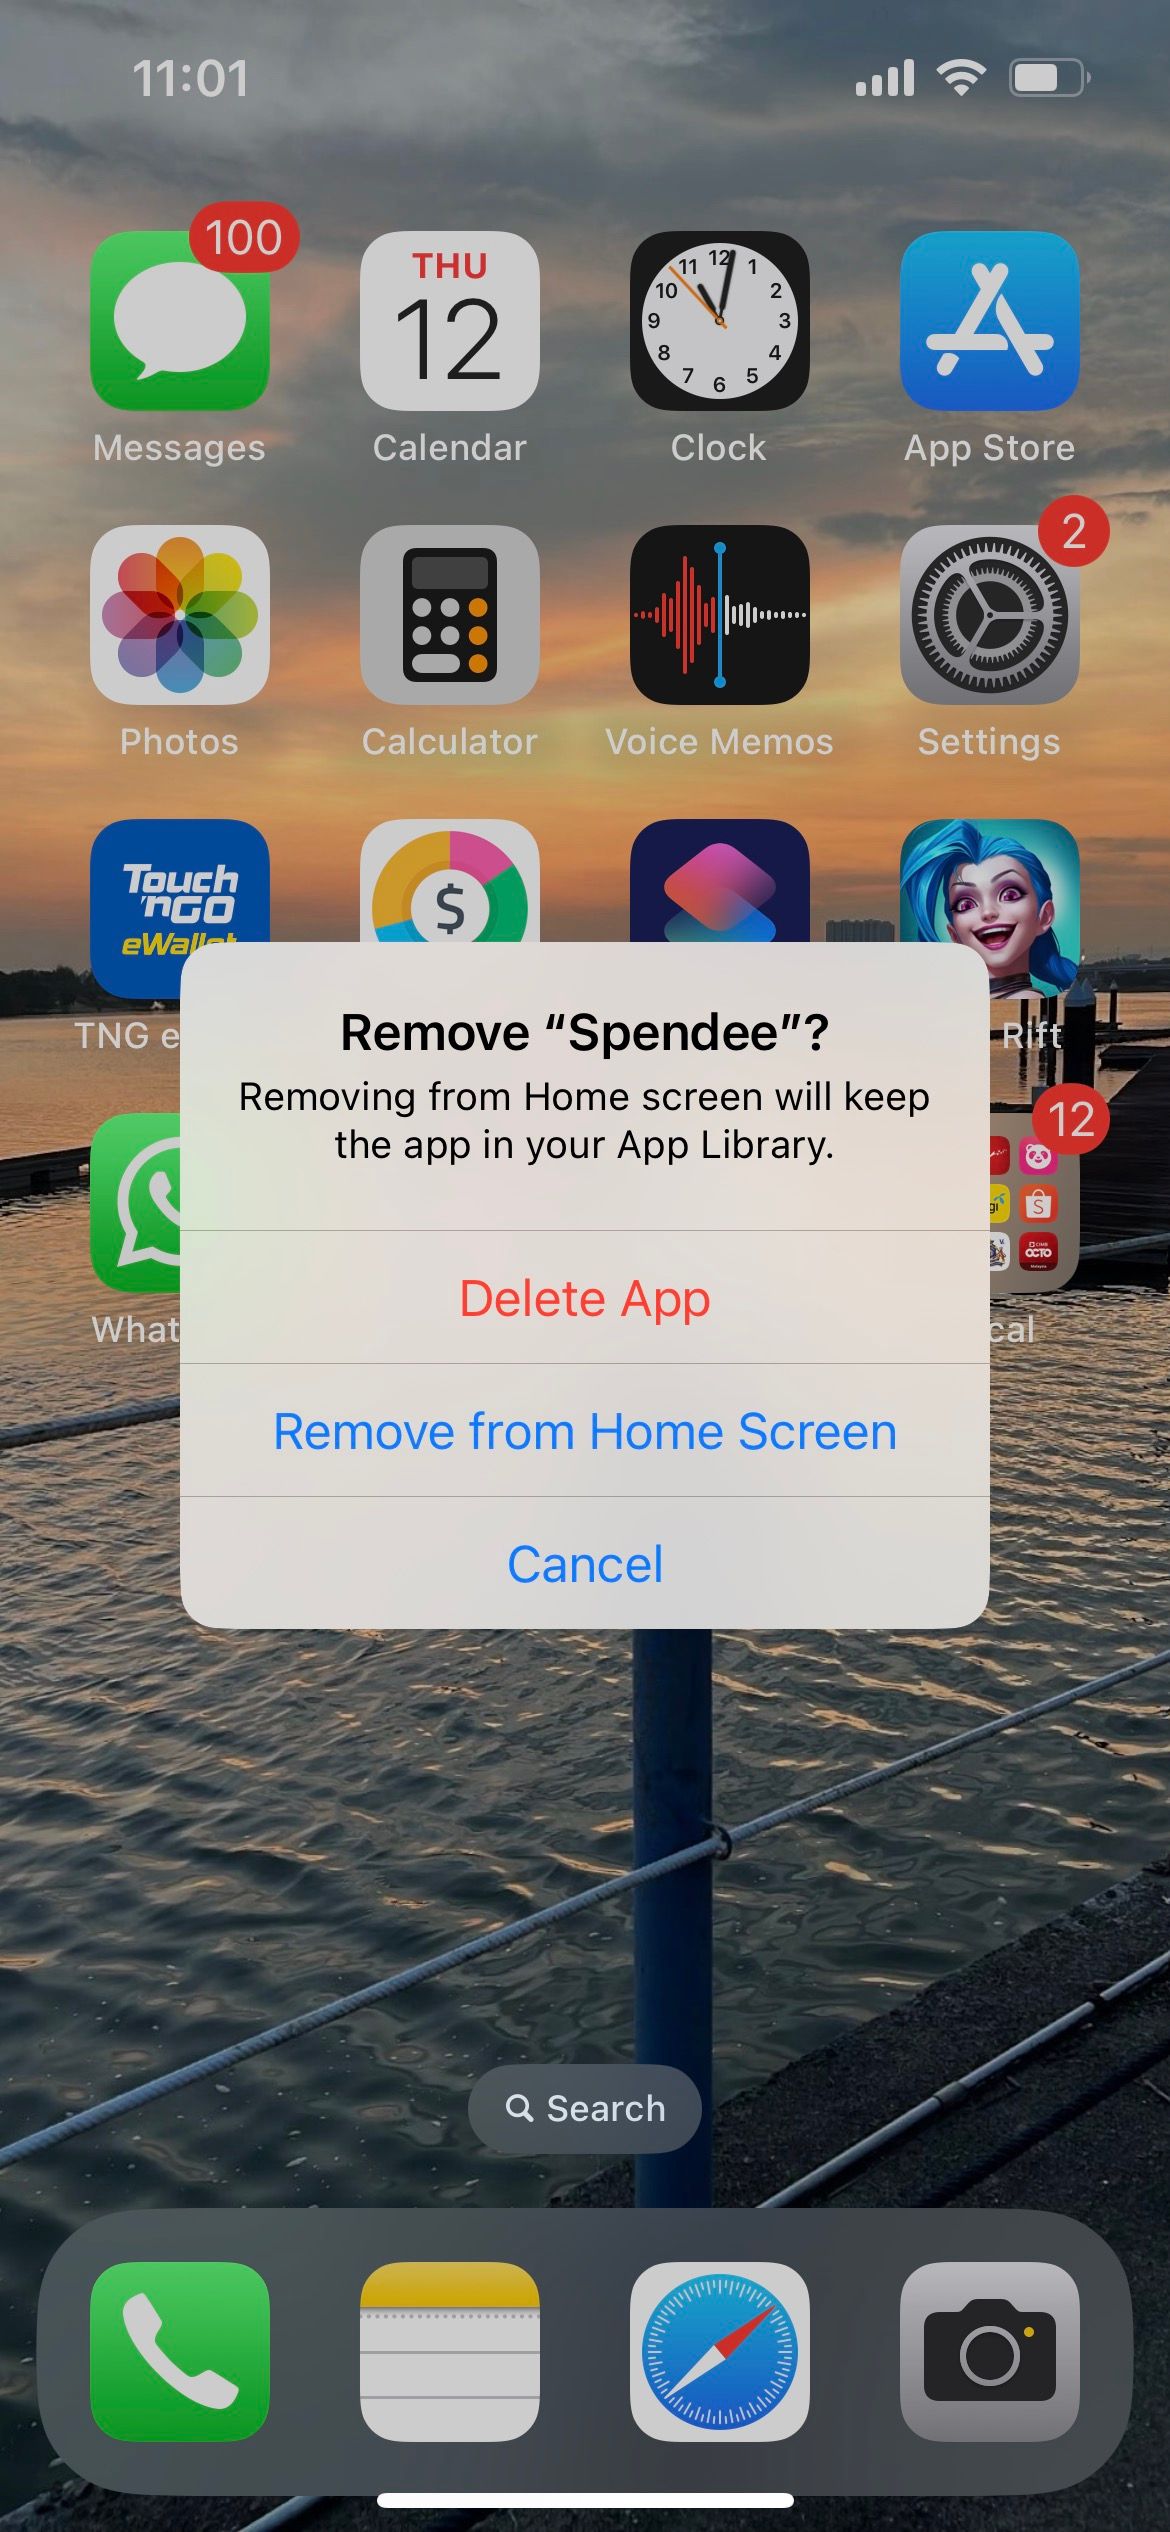 remove app confirmation in iphone